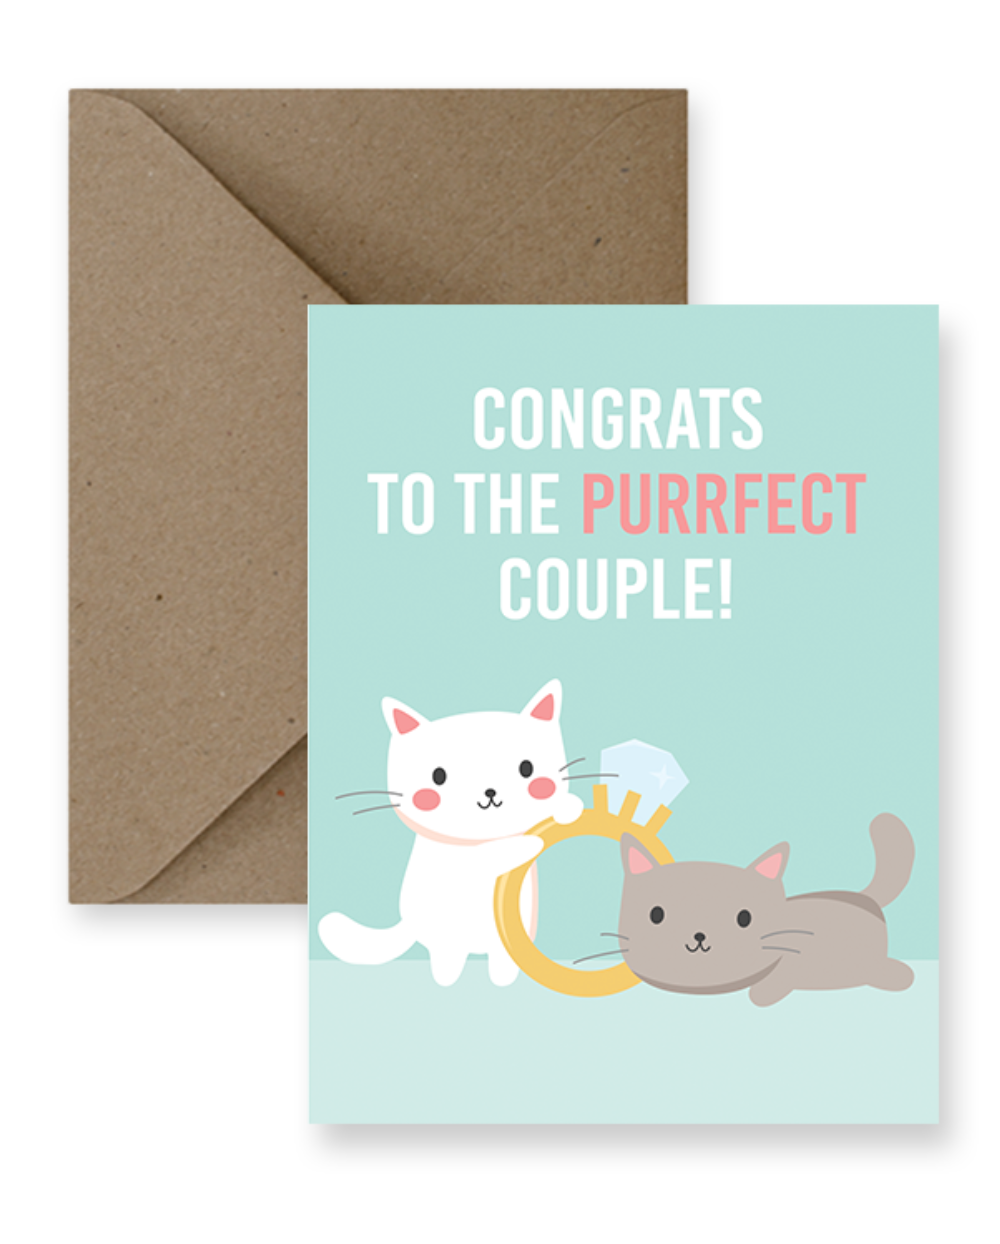 “Congrats to the Purrfect Couple”